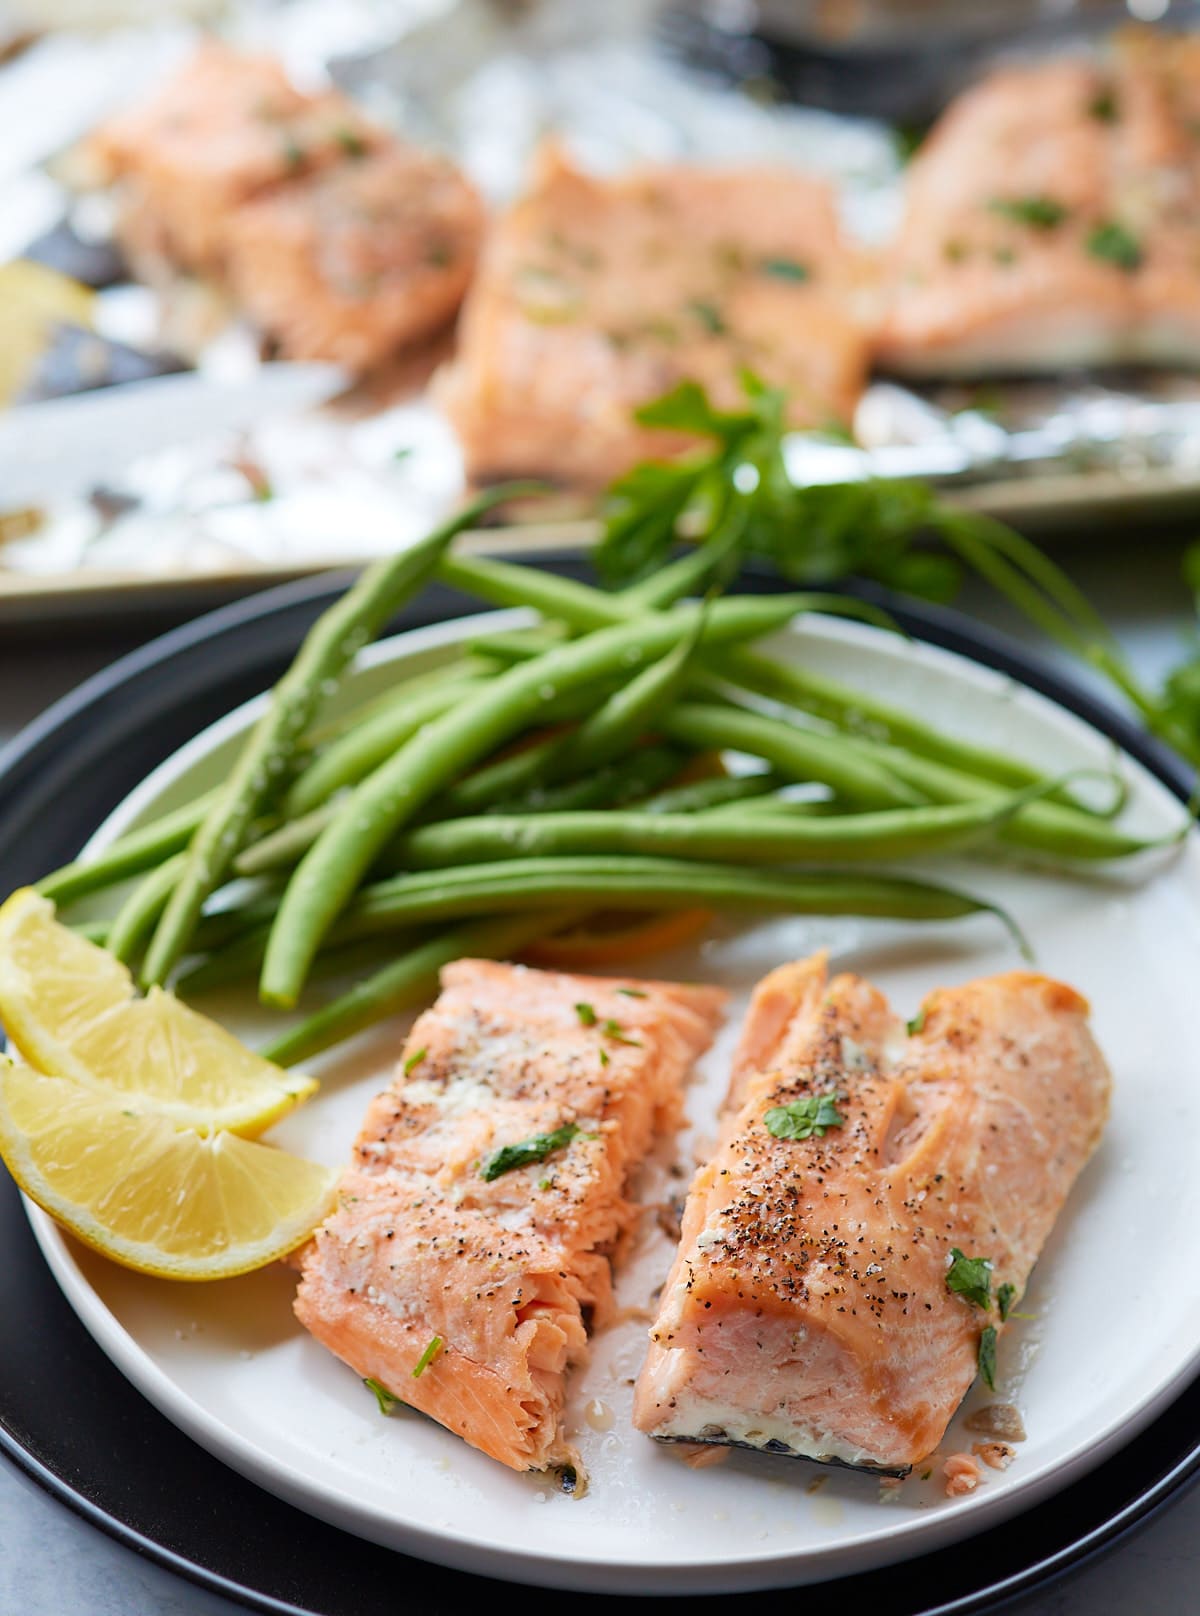 Two salmon fillets served with green beans and a lemon wedge.